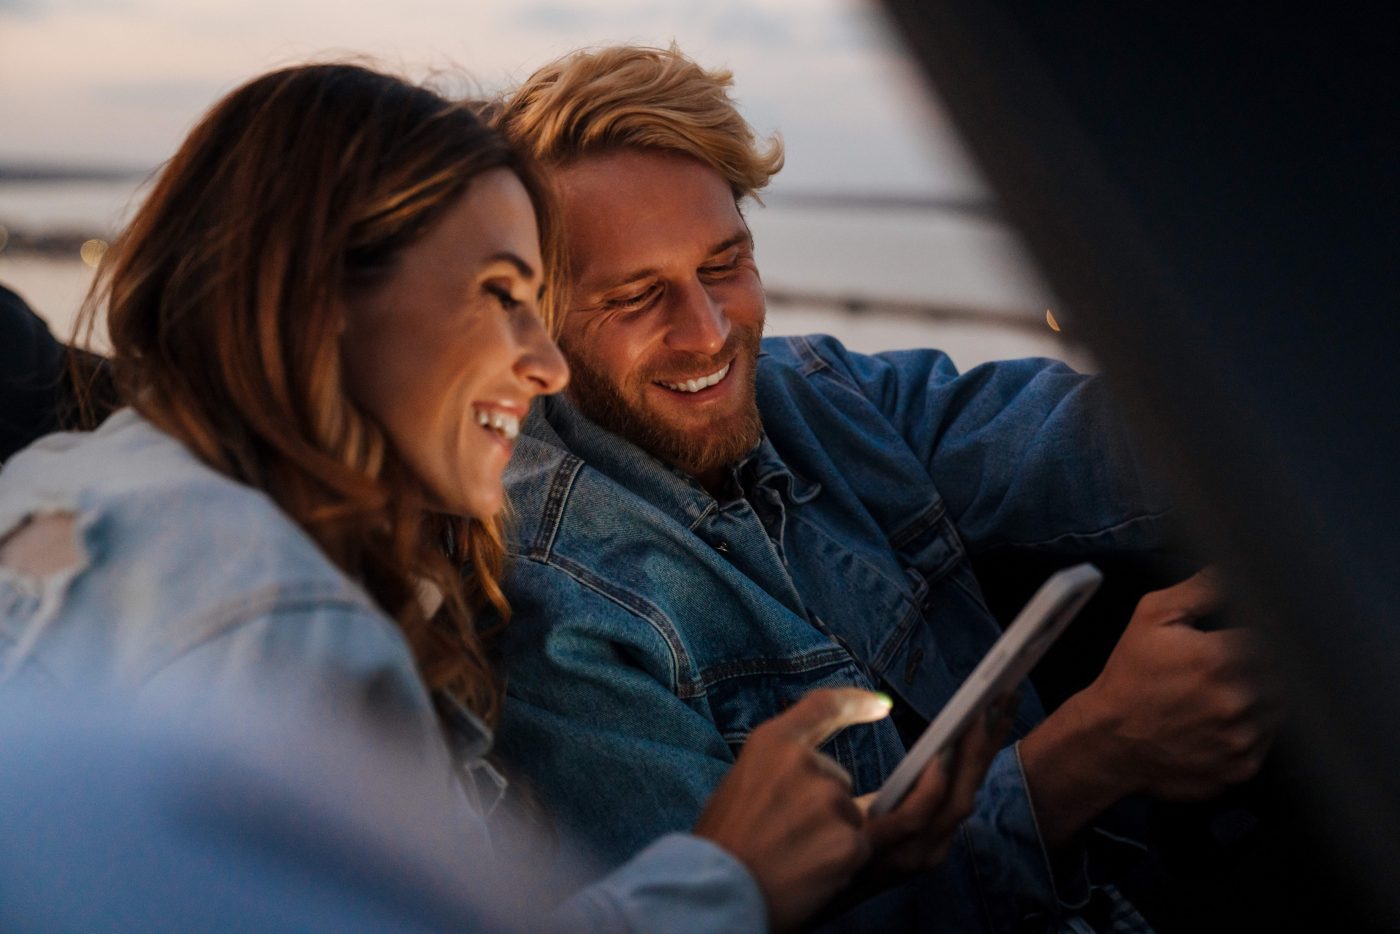 White happy couple smiling and using cellphone during car trip outdoors